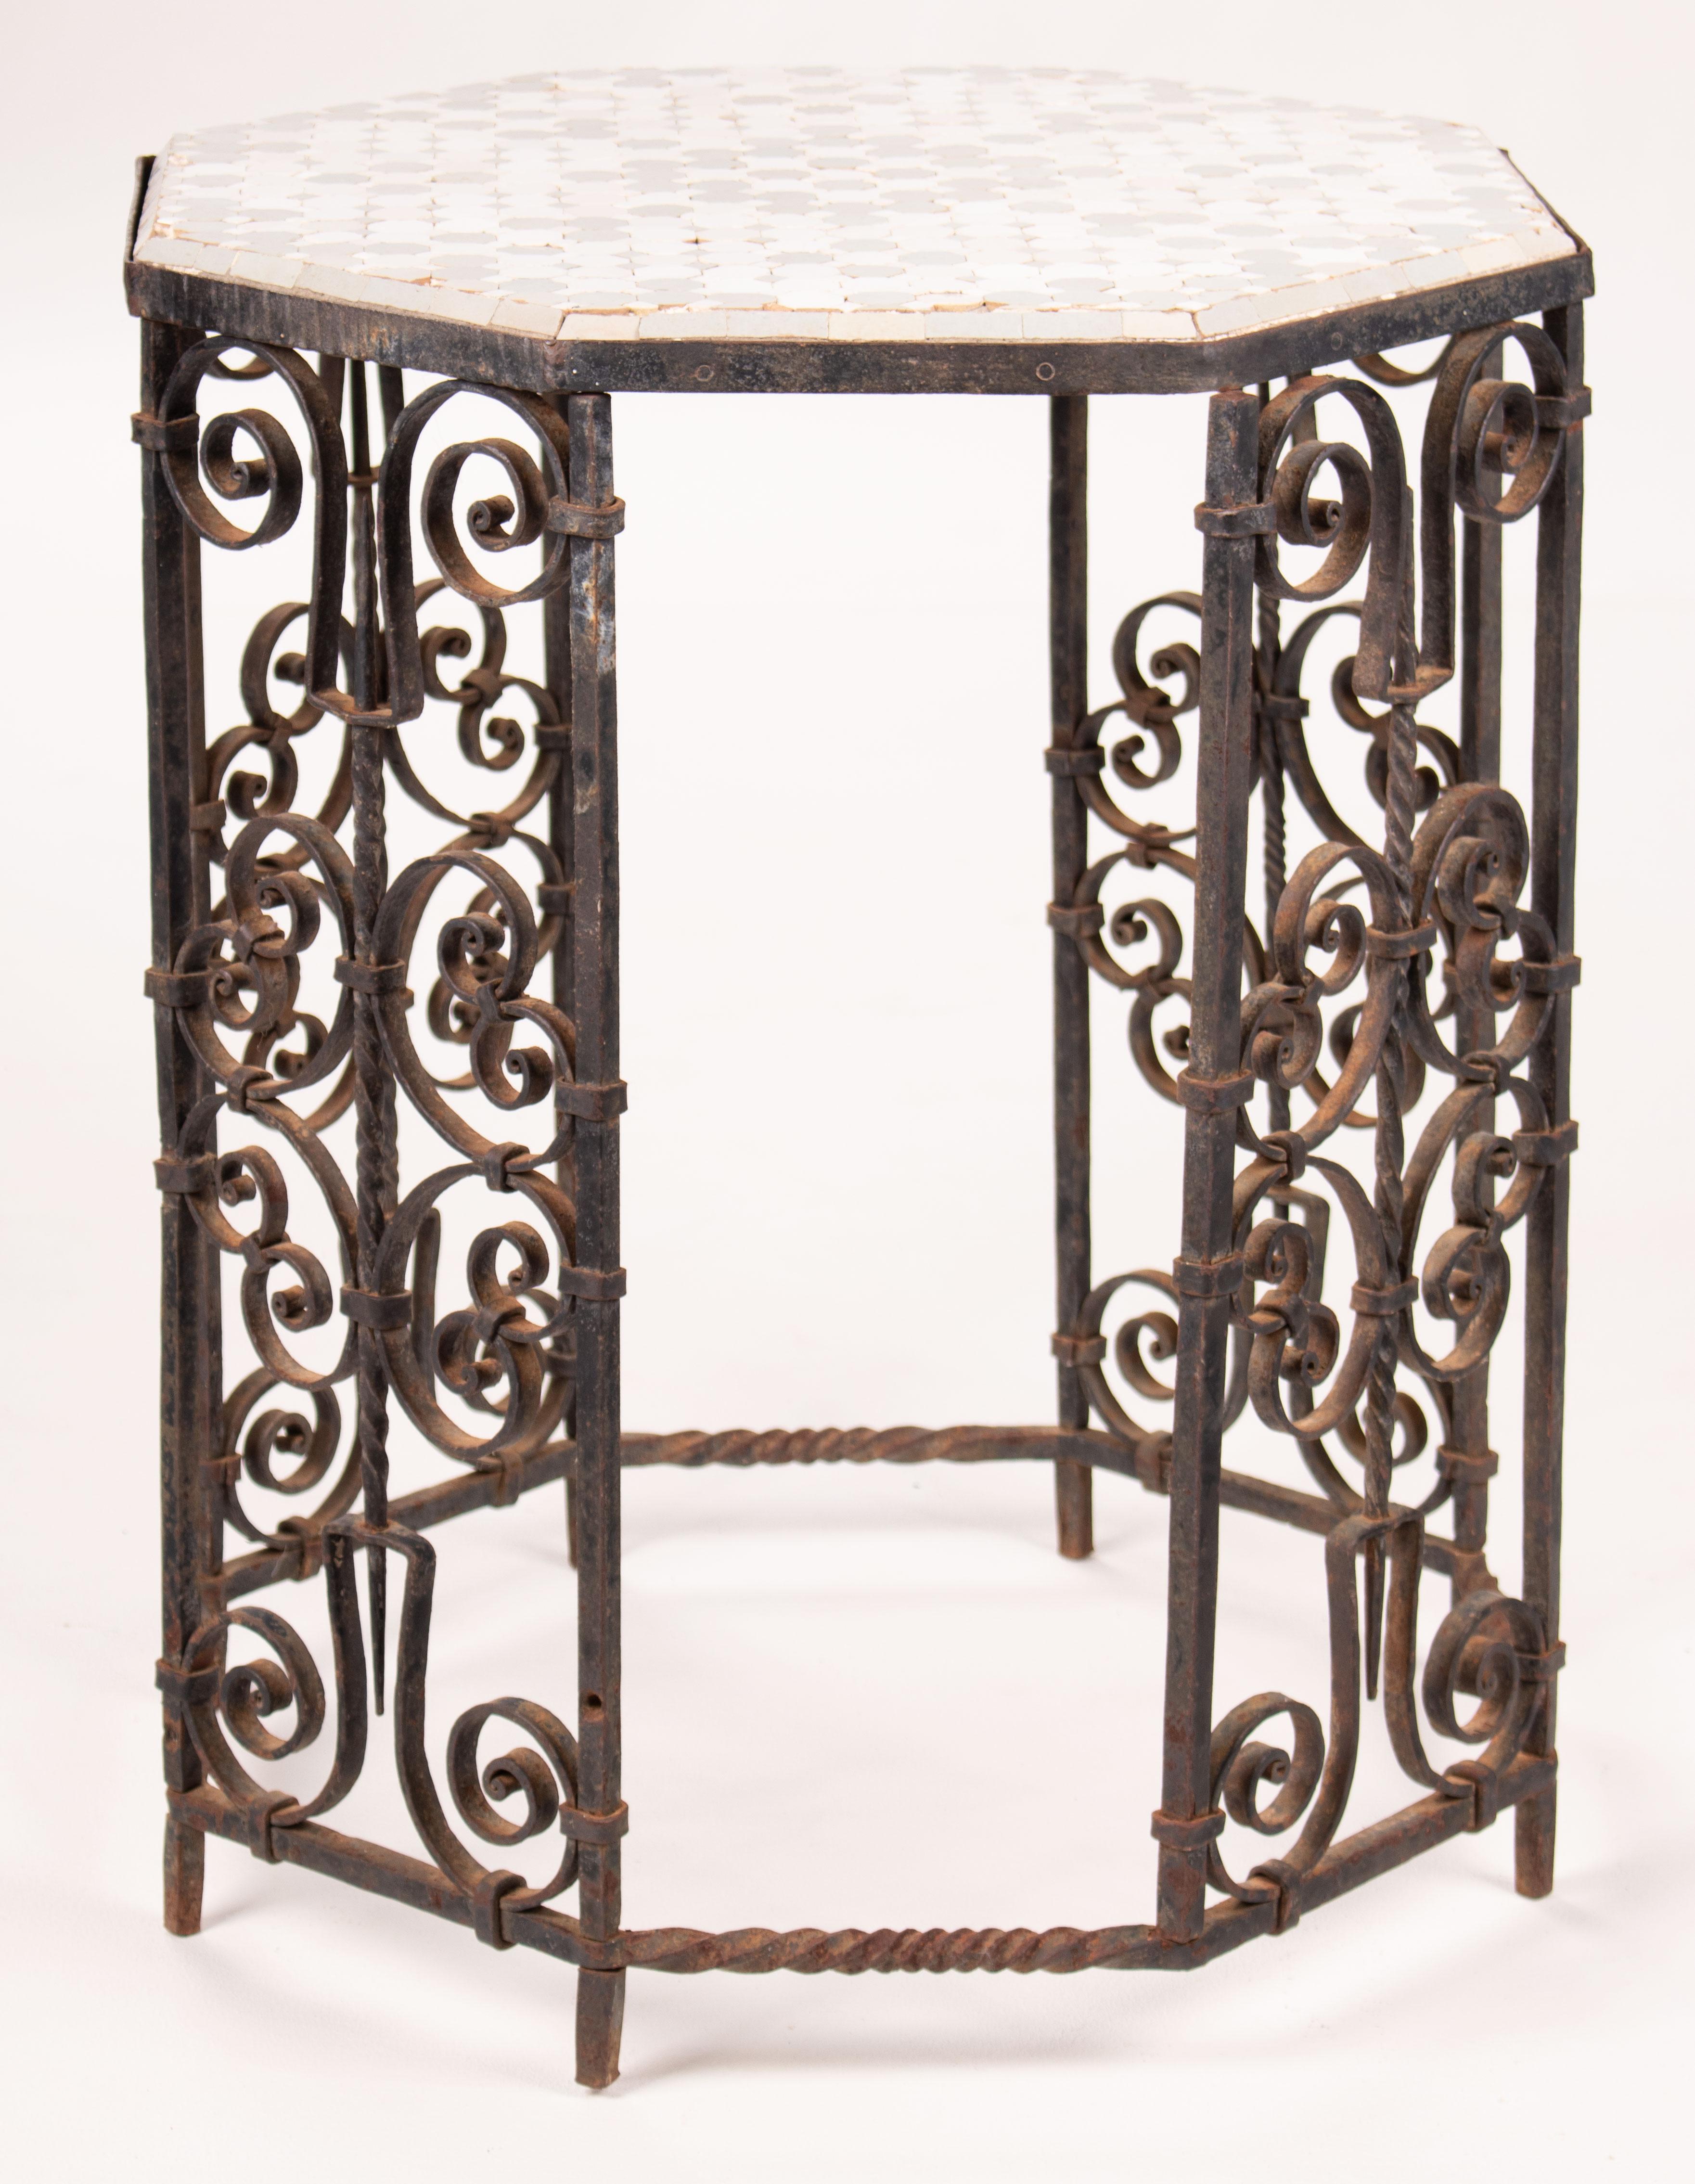 19th century French wrought iron octagonal ceramic top table.